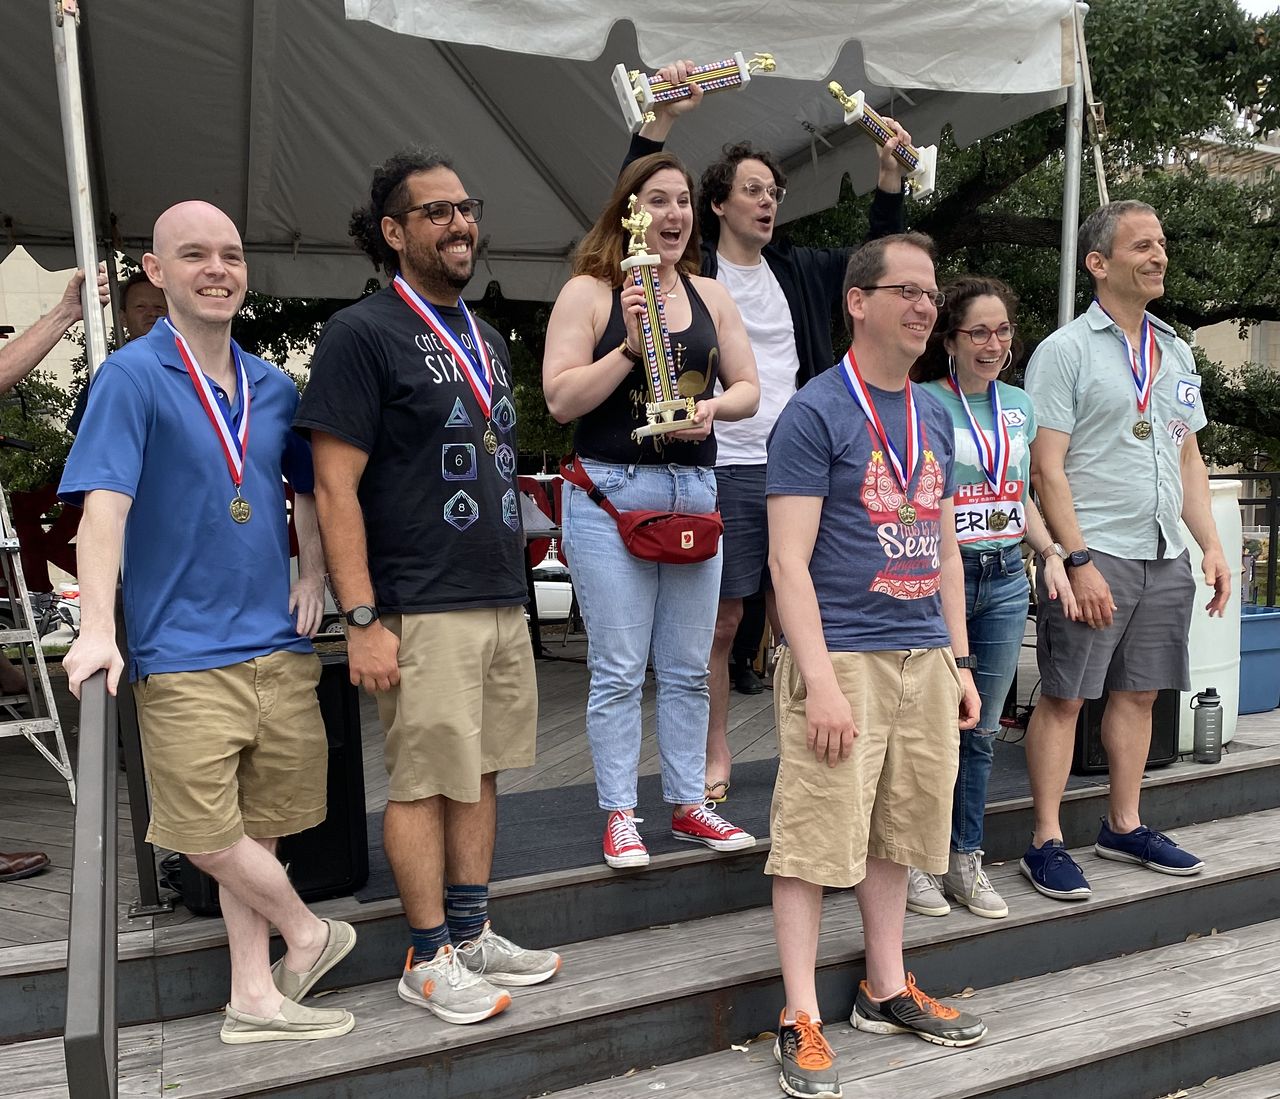 The 7 winners of the Pun-Off, wearing medals and holding trophies.